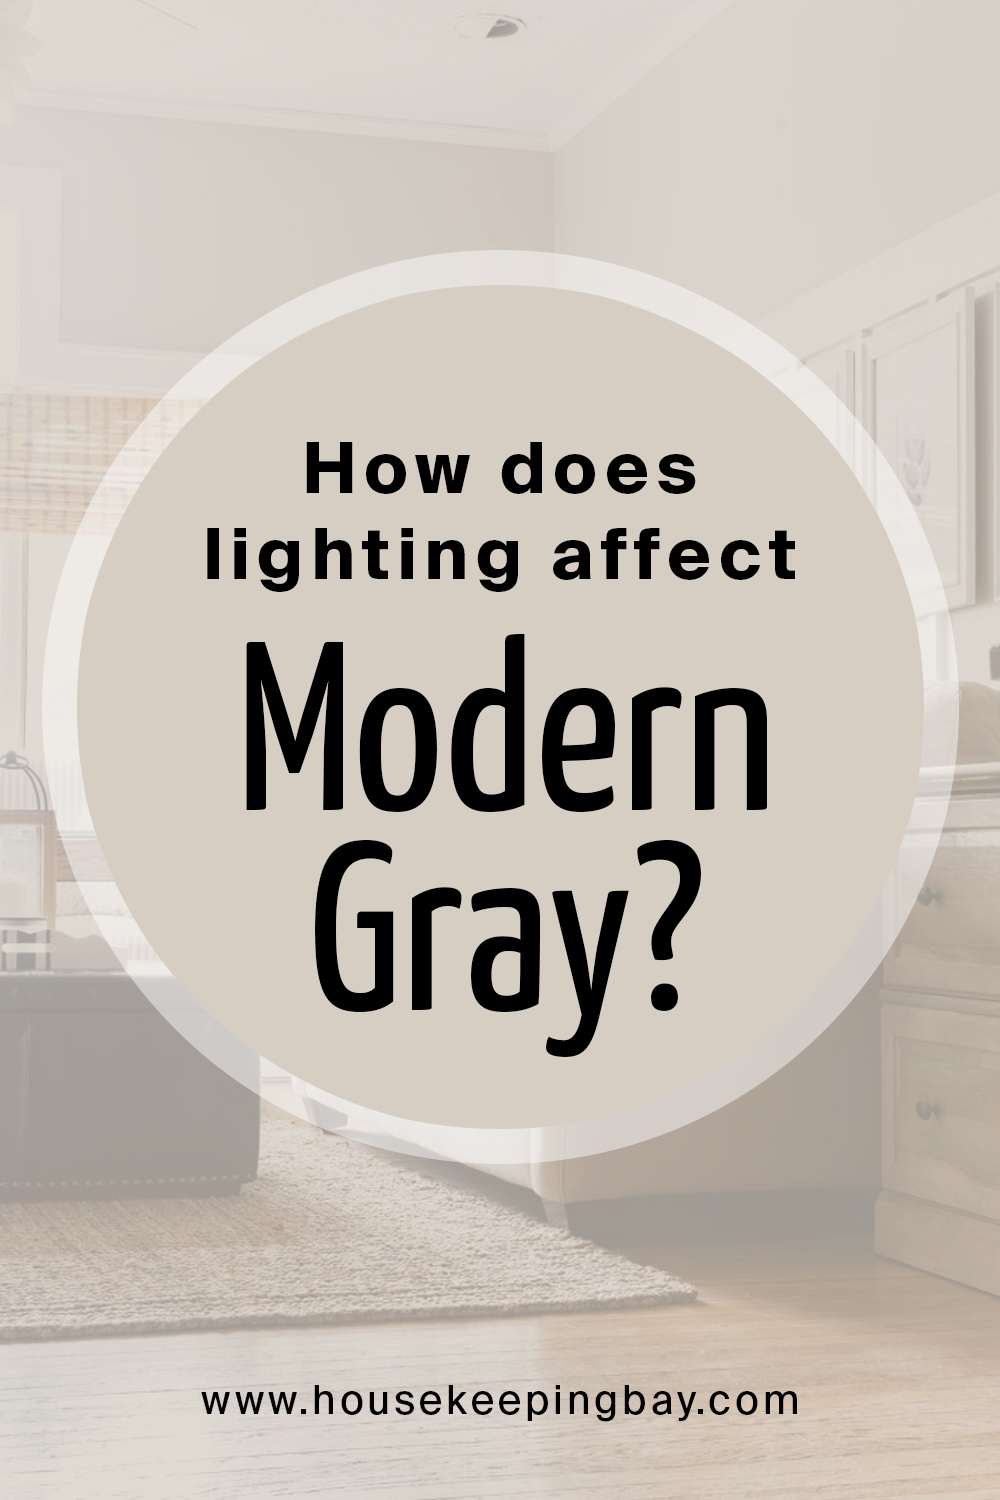 How does lighting affect Modern Gray